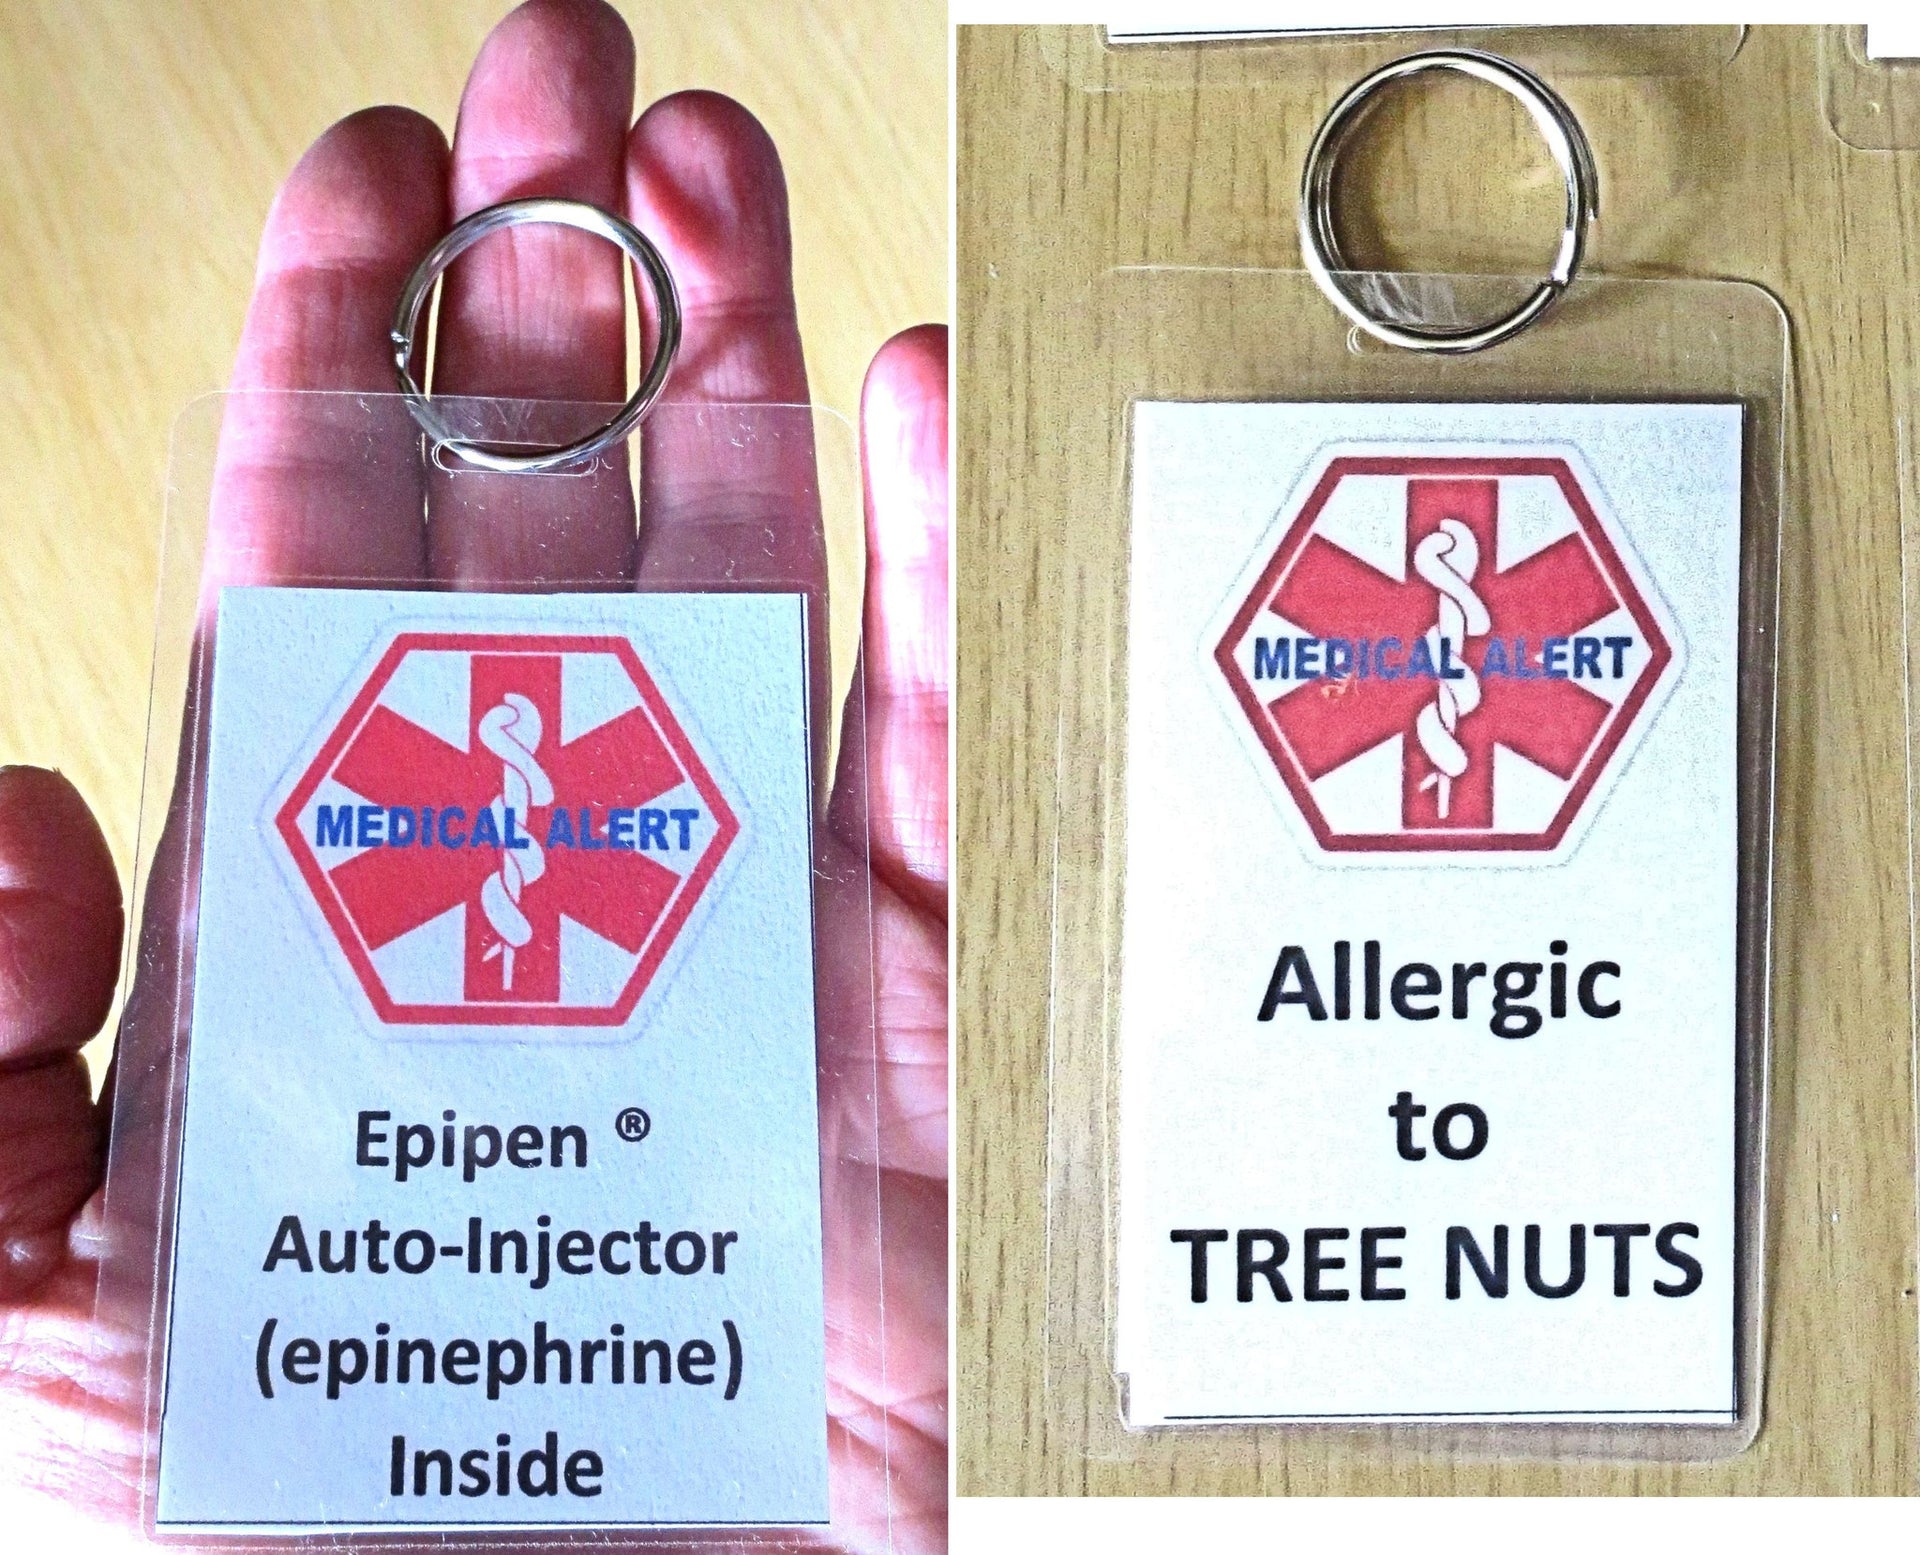 medical alert tag epipen ® auto-injector (epinephrine) inside laminated tag personalize epinephrine + tree nuts allergy / none